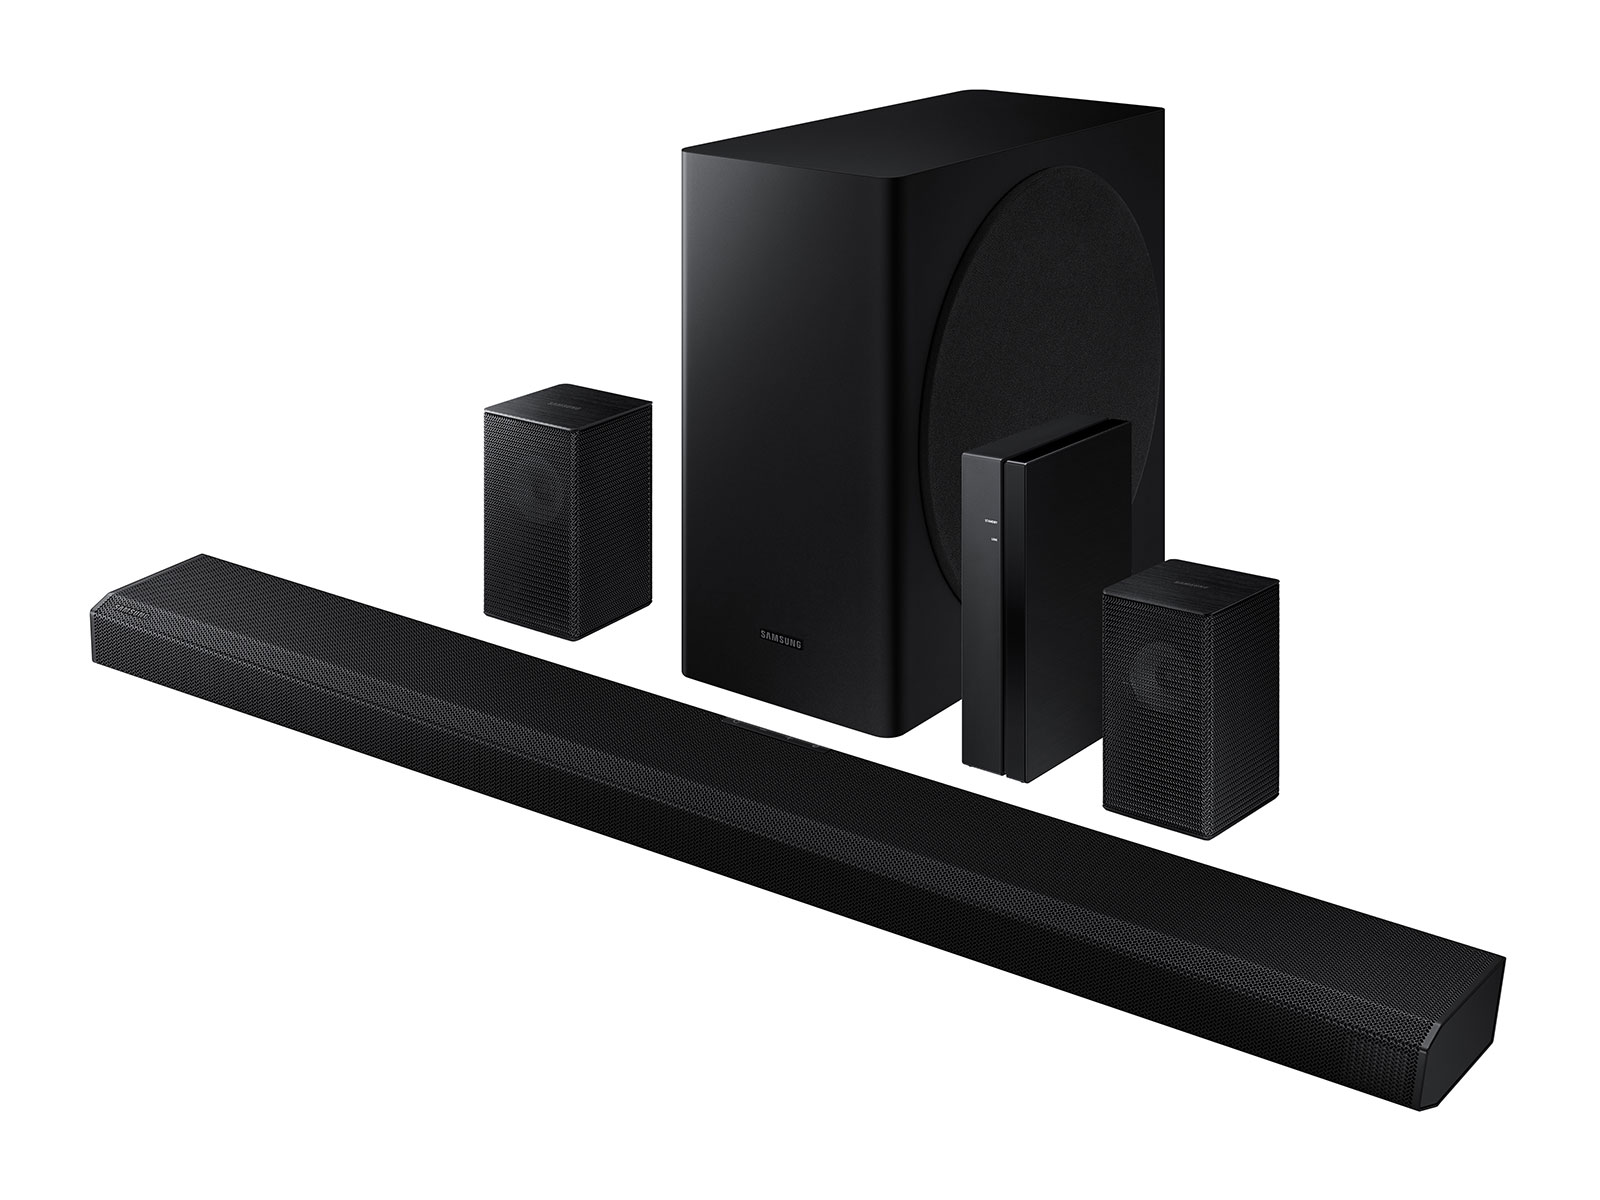 Samsung Hw Q850t 5 1 2ch Soundbar With Dolby Atmos Dts X And Wireless Rear Speakers Samsung Us